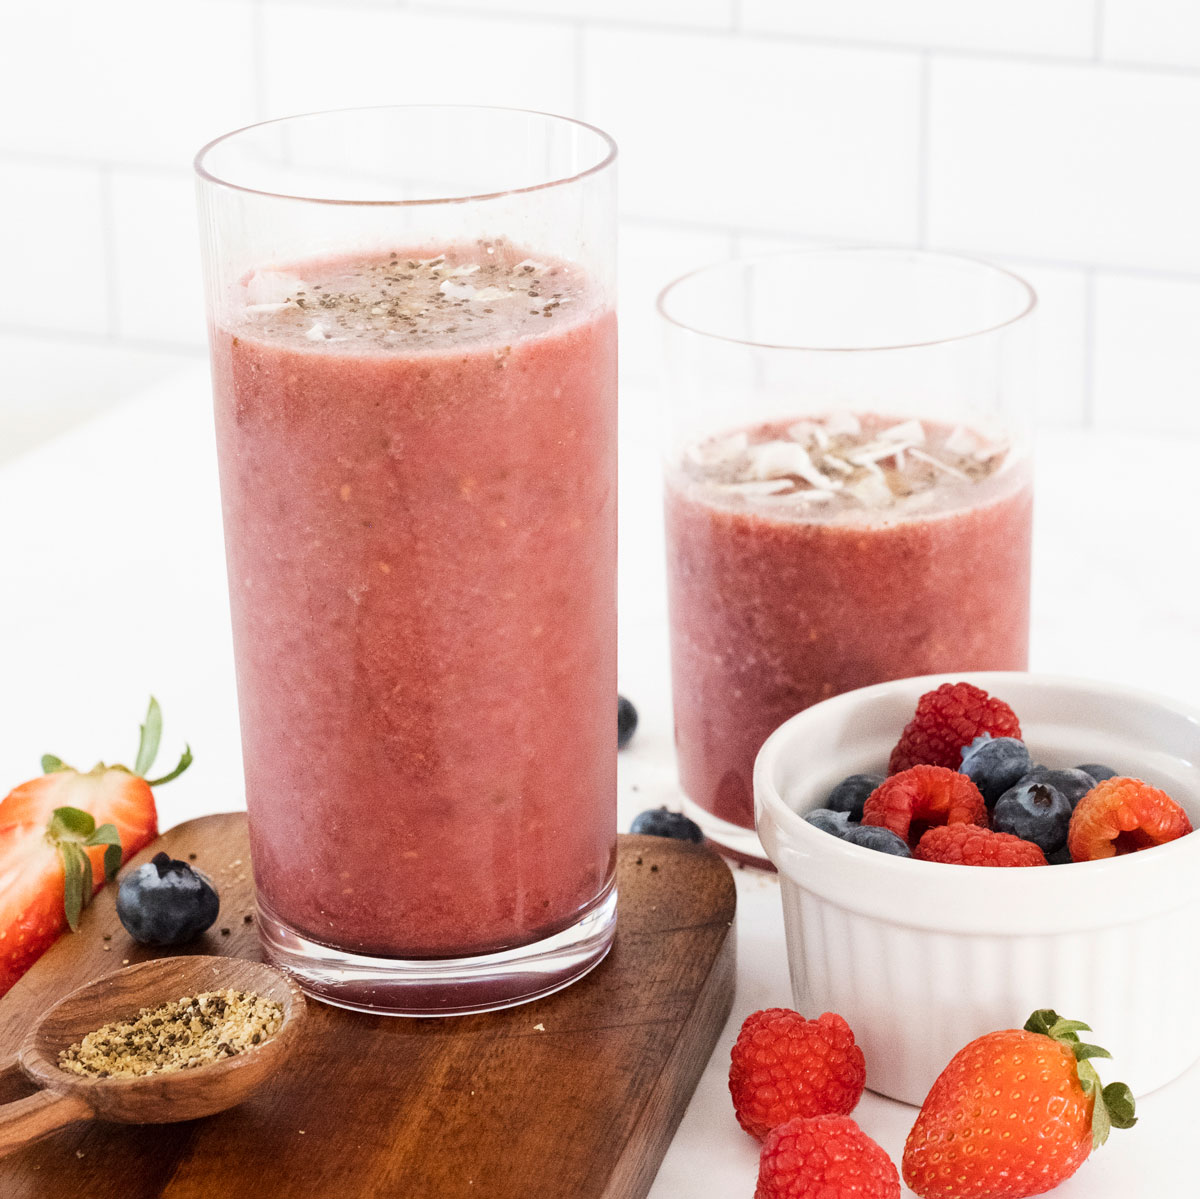 Super Simple Strawberry Smoothie You’ll Crave Every Day!